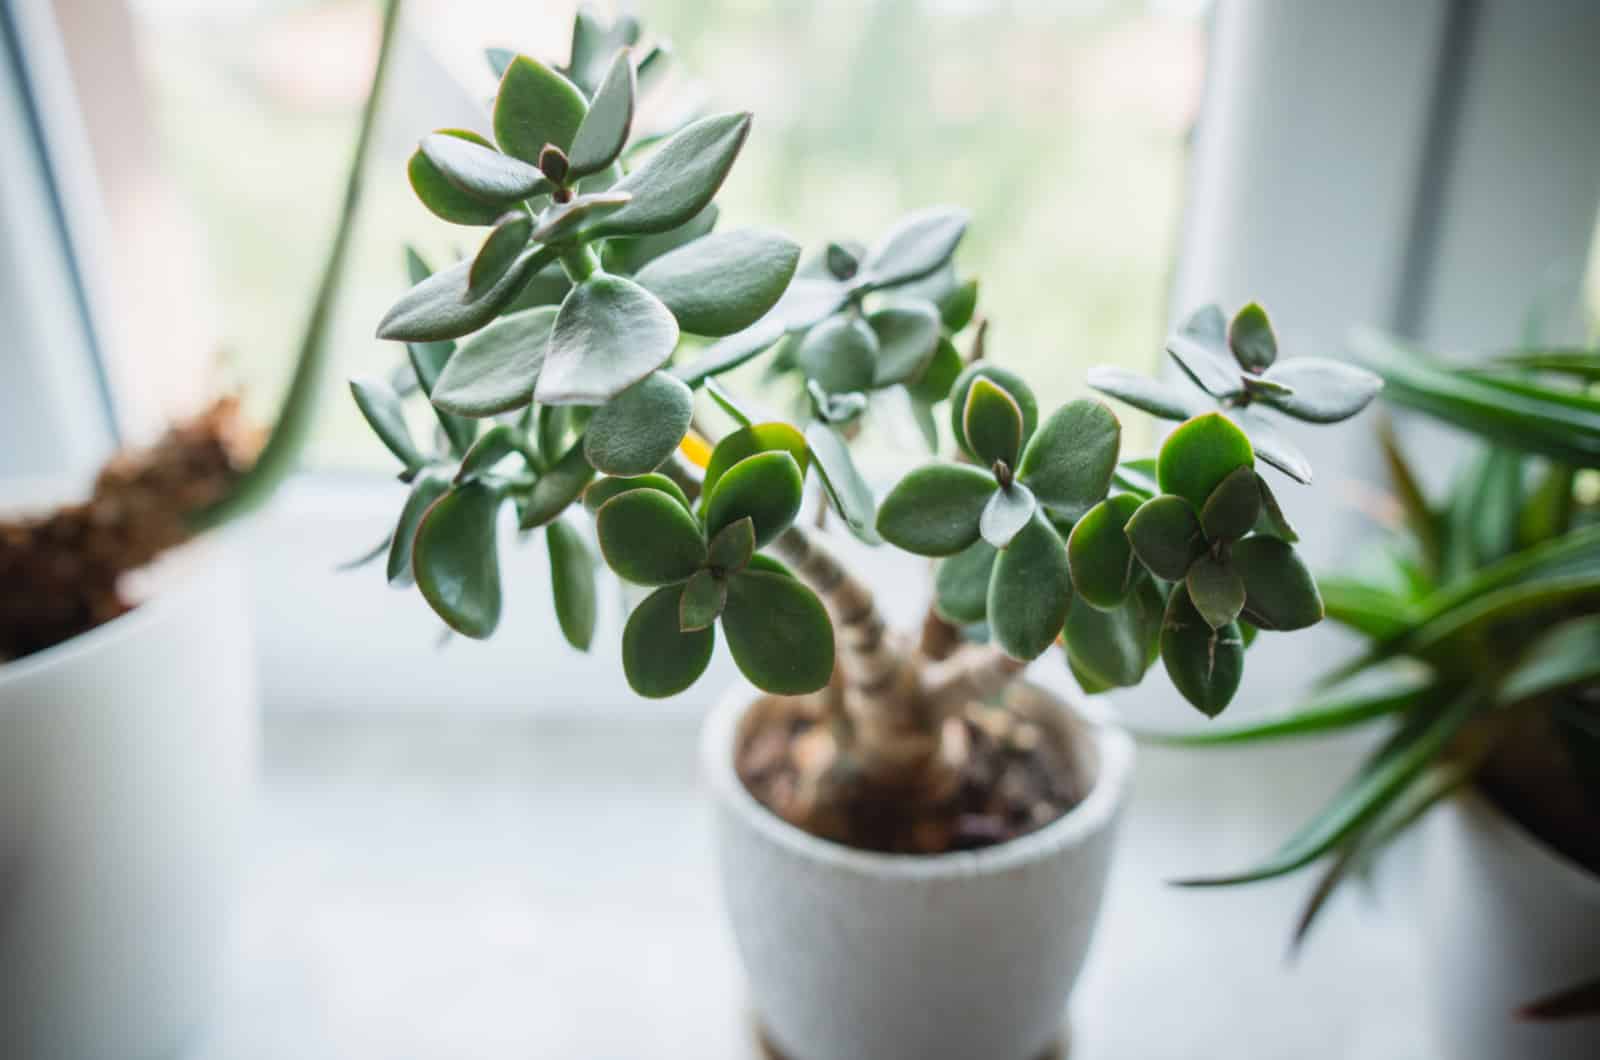 Scale On Jade Plant: How To Solve The Issue